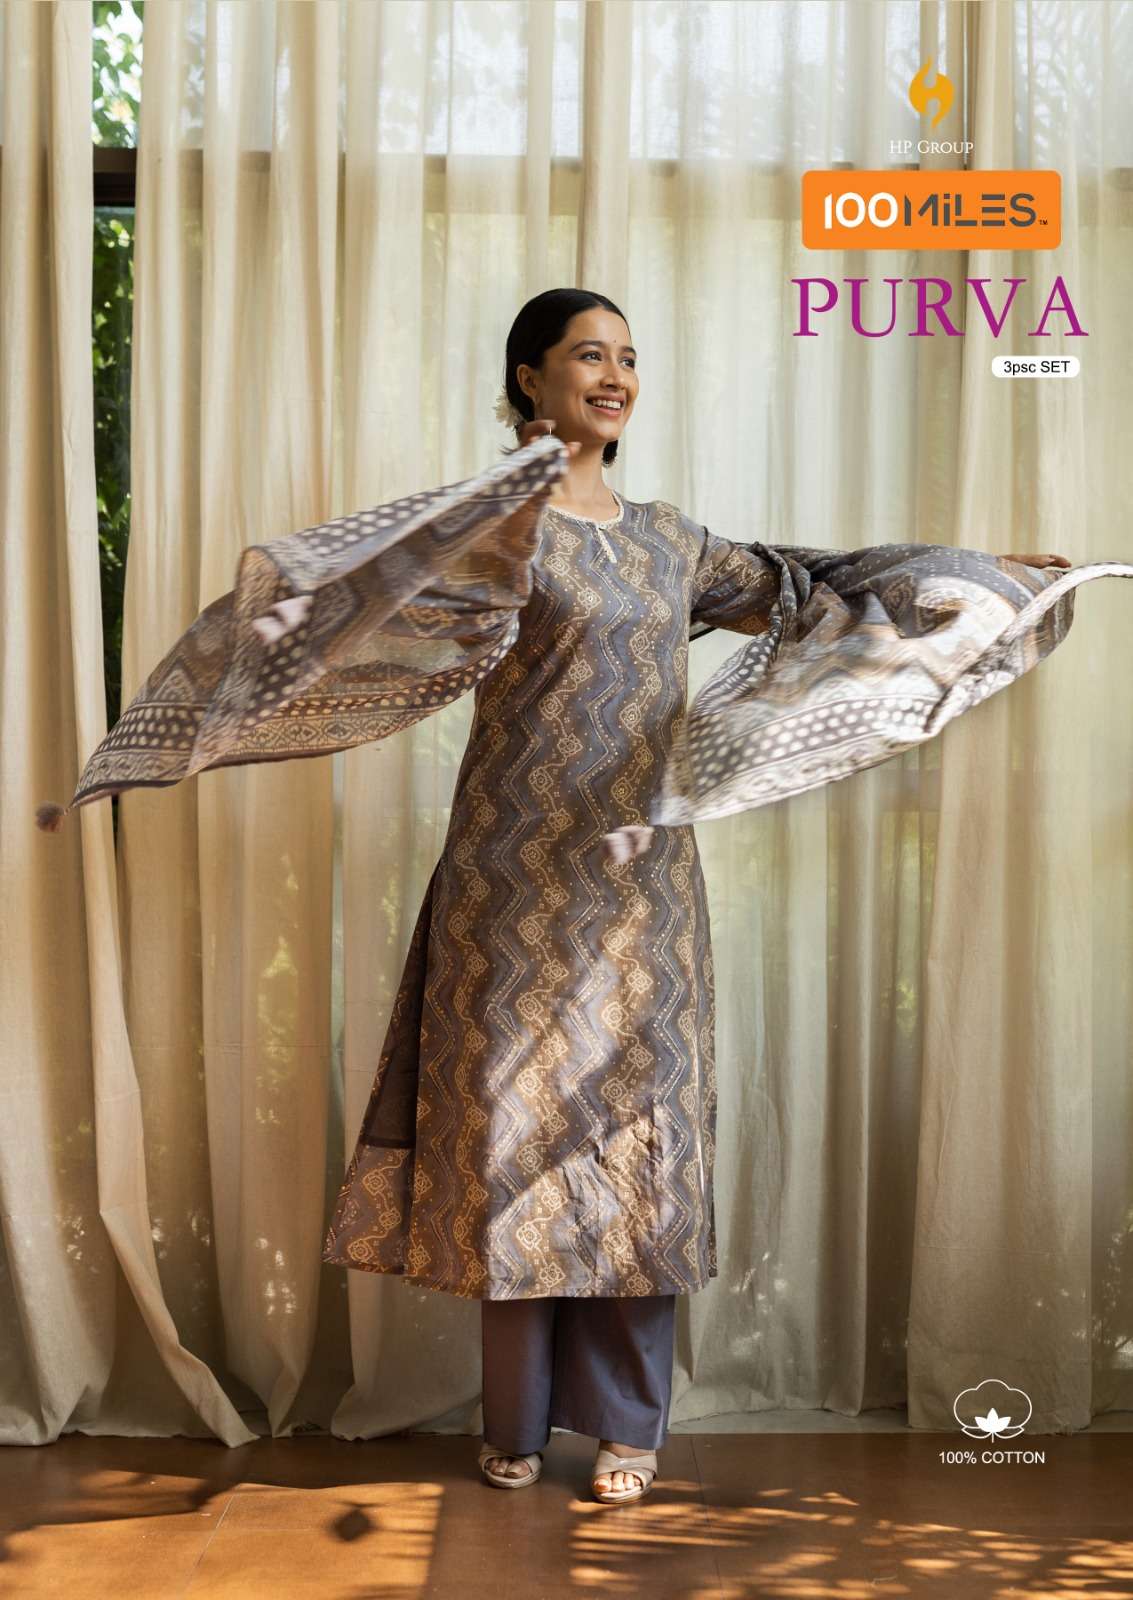 purva by 100 miles kurti pant with dupatta 3 psc readymade set 